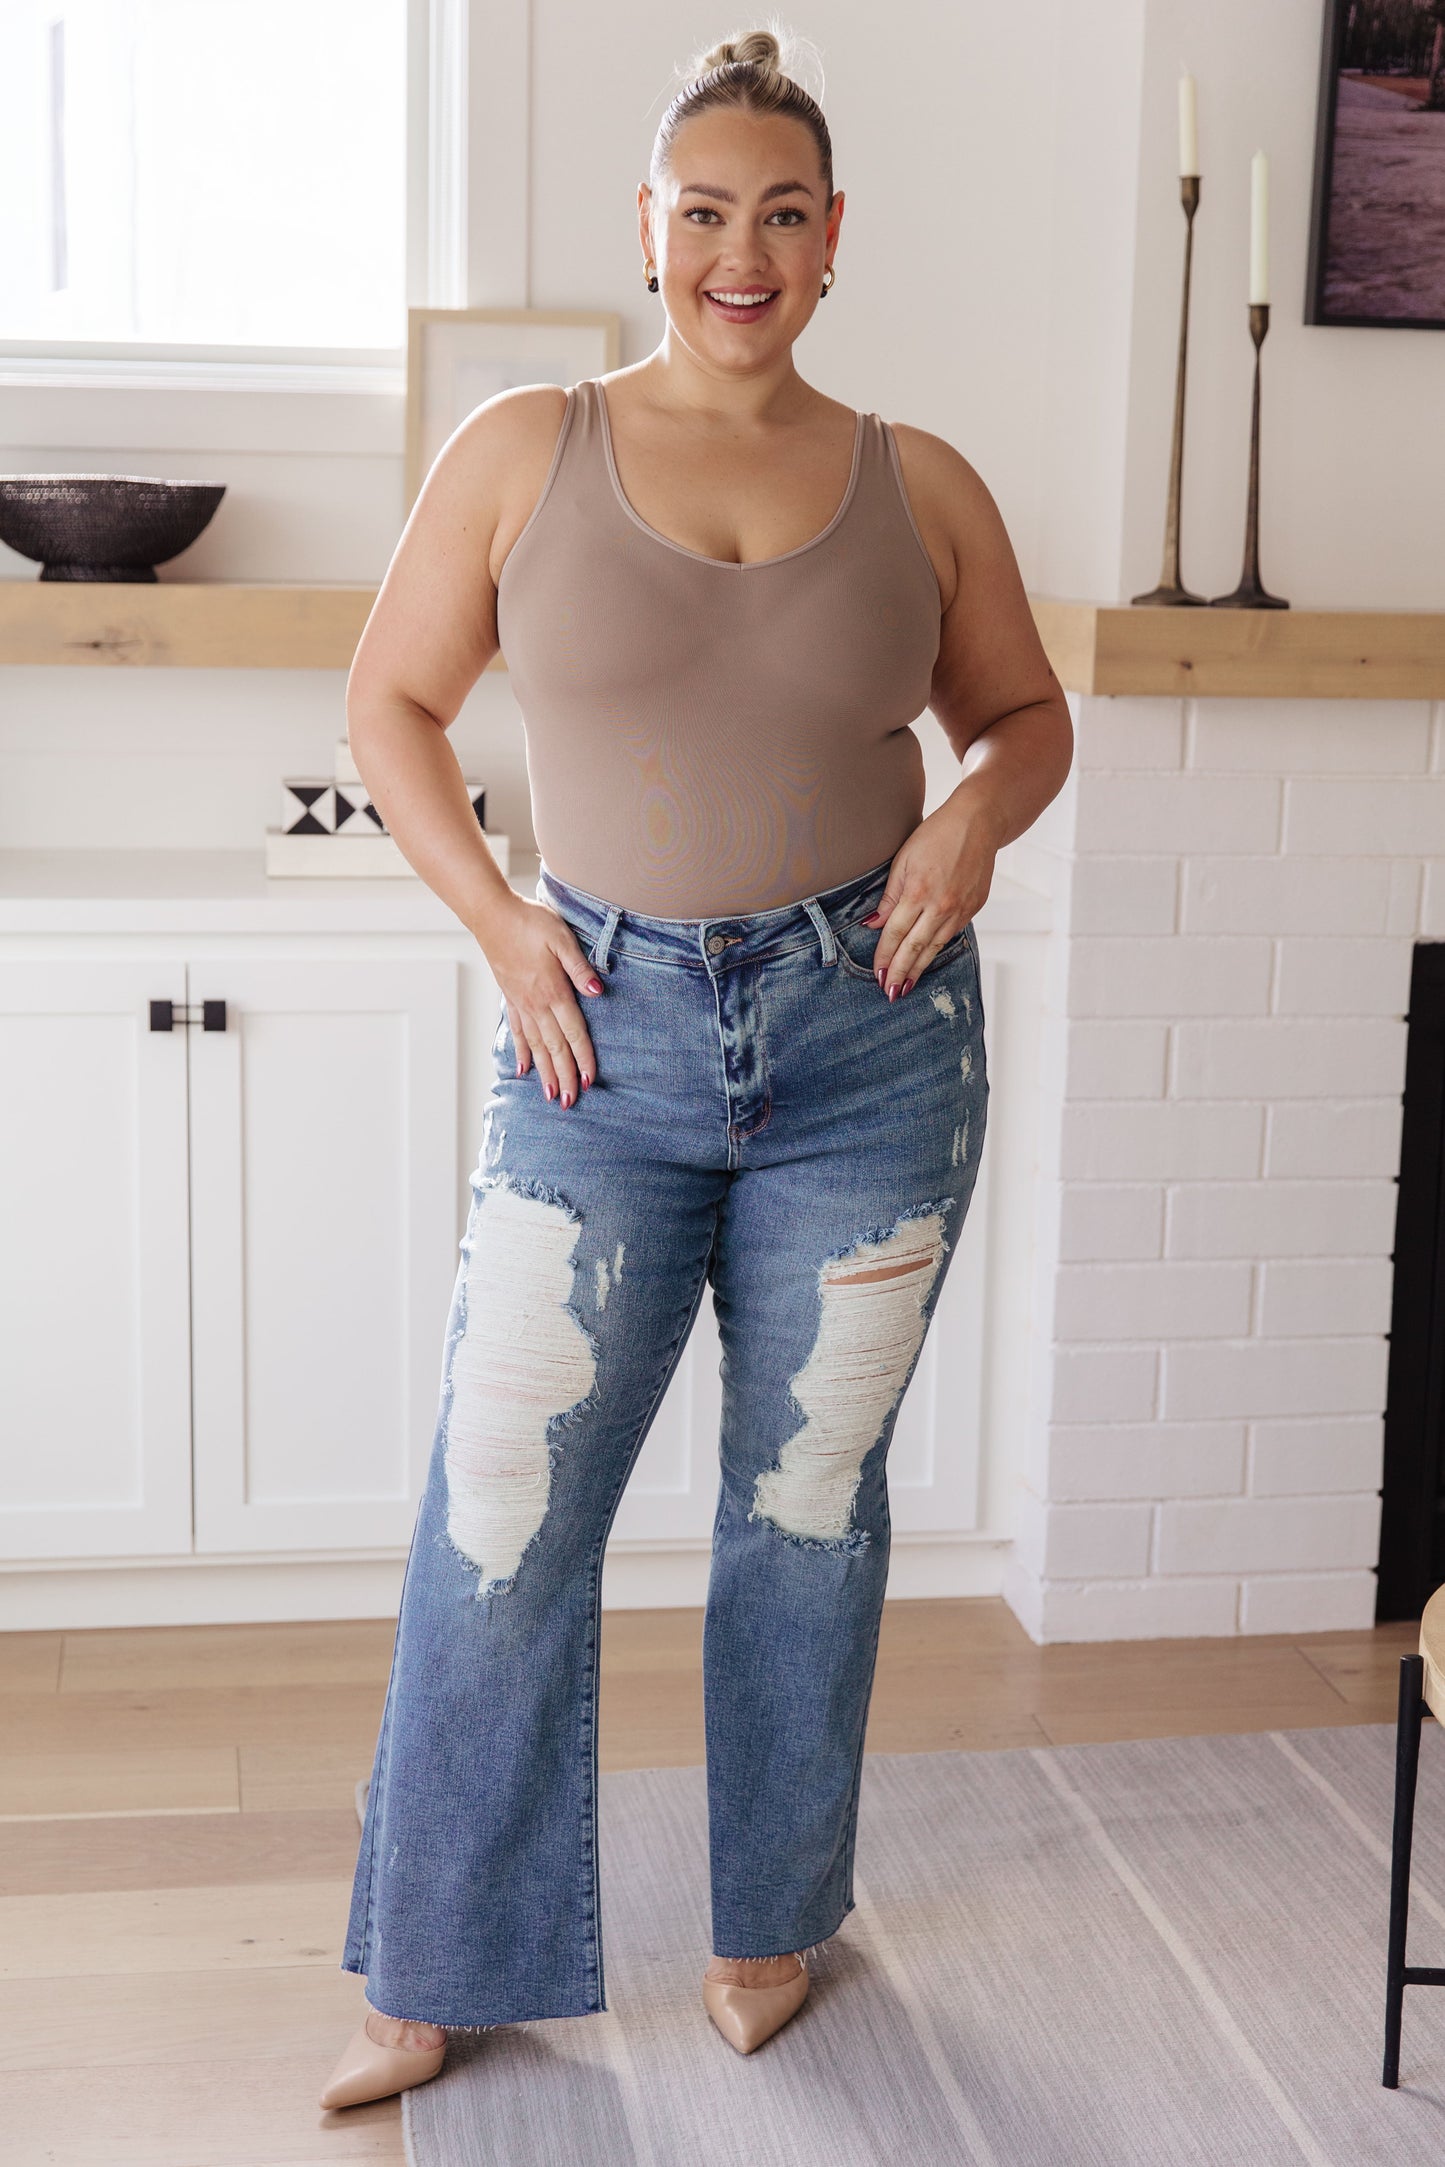 If you've got a flair for the dramatic, look no further than the Kiana Heavy Destroy Flare Jeans from Judy Blue! These amazing jeans feature a stretchy medium wash denim, that shapes a hi-rise with a five pocket cut, and zipper fly that drops into a heavy distressed leg with a raw flare hem. Pair these amazing jeans with a graphic tee, heeled boots, and a wide brim hat for a cute boho look!